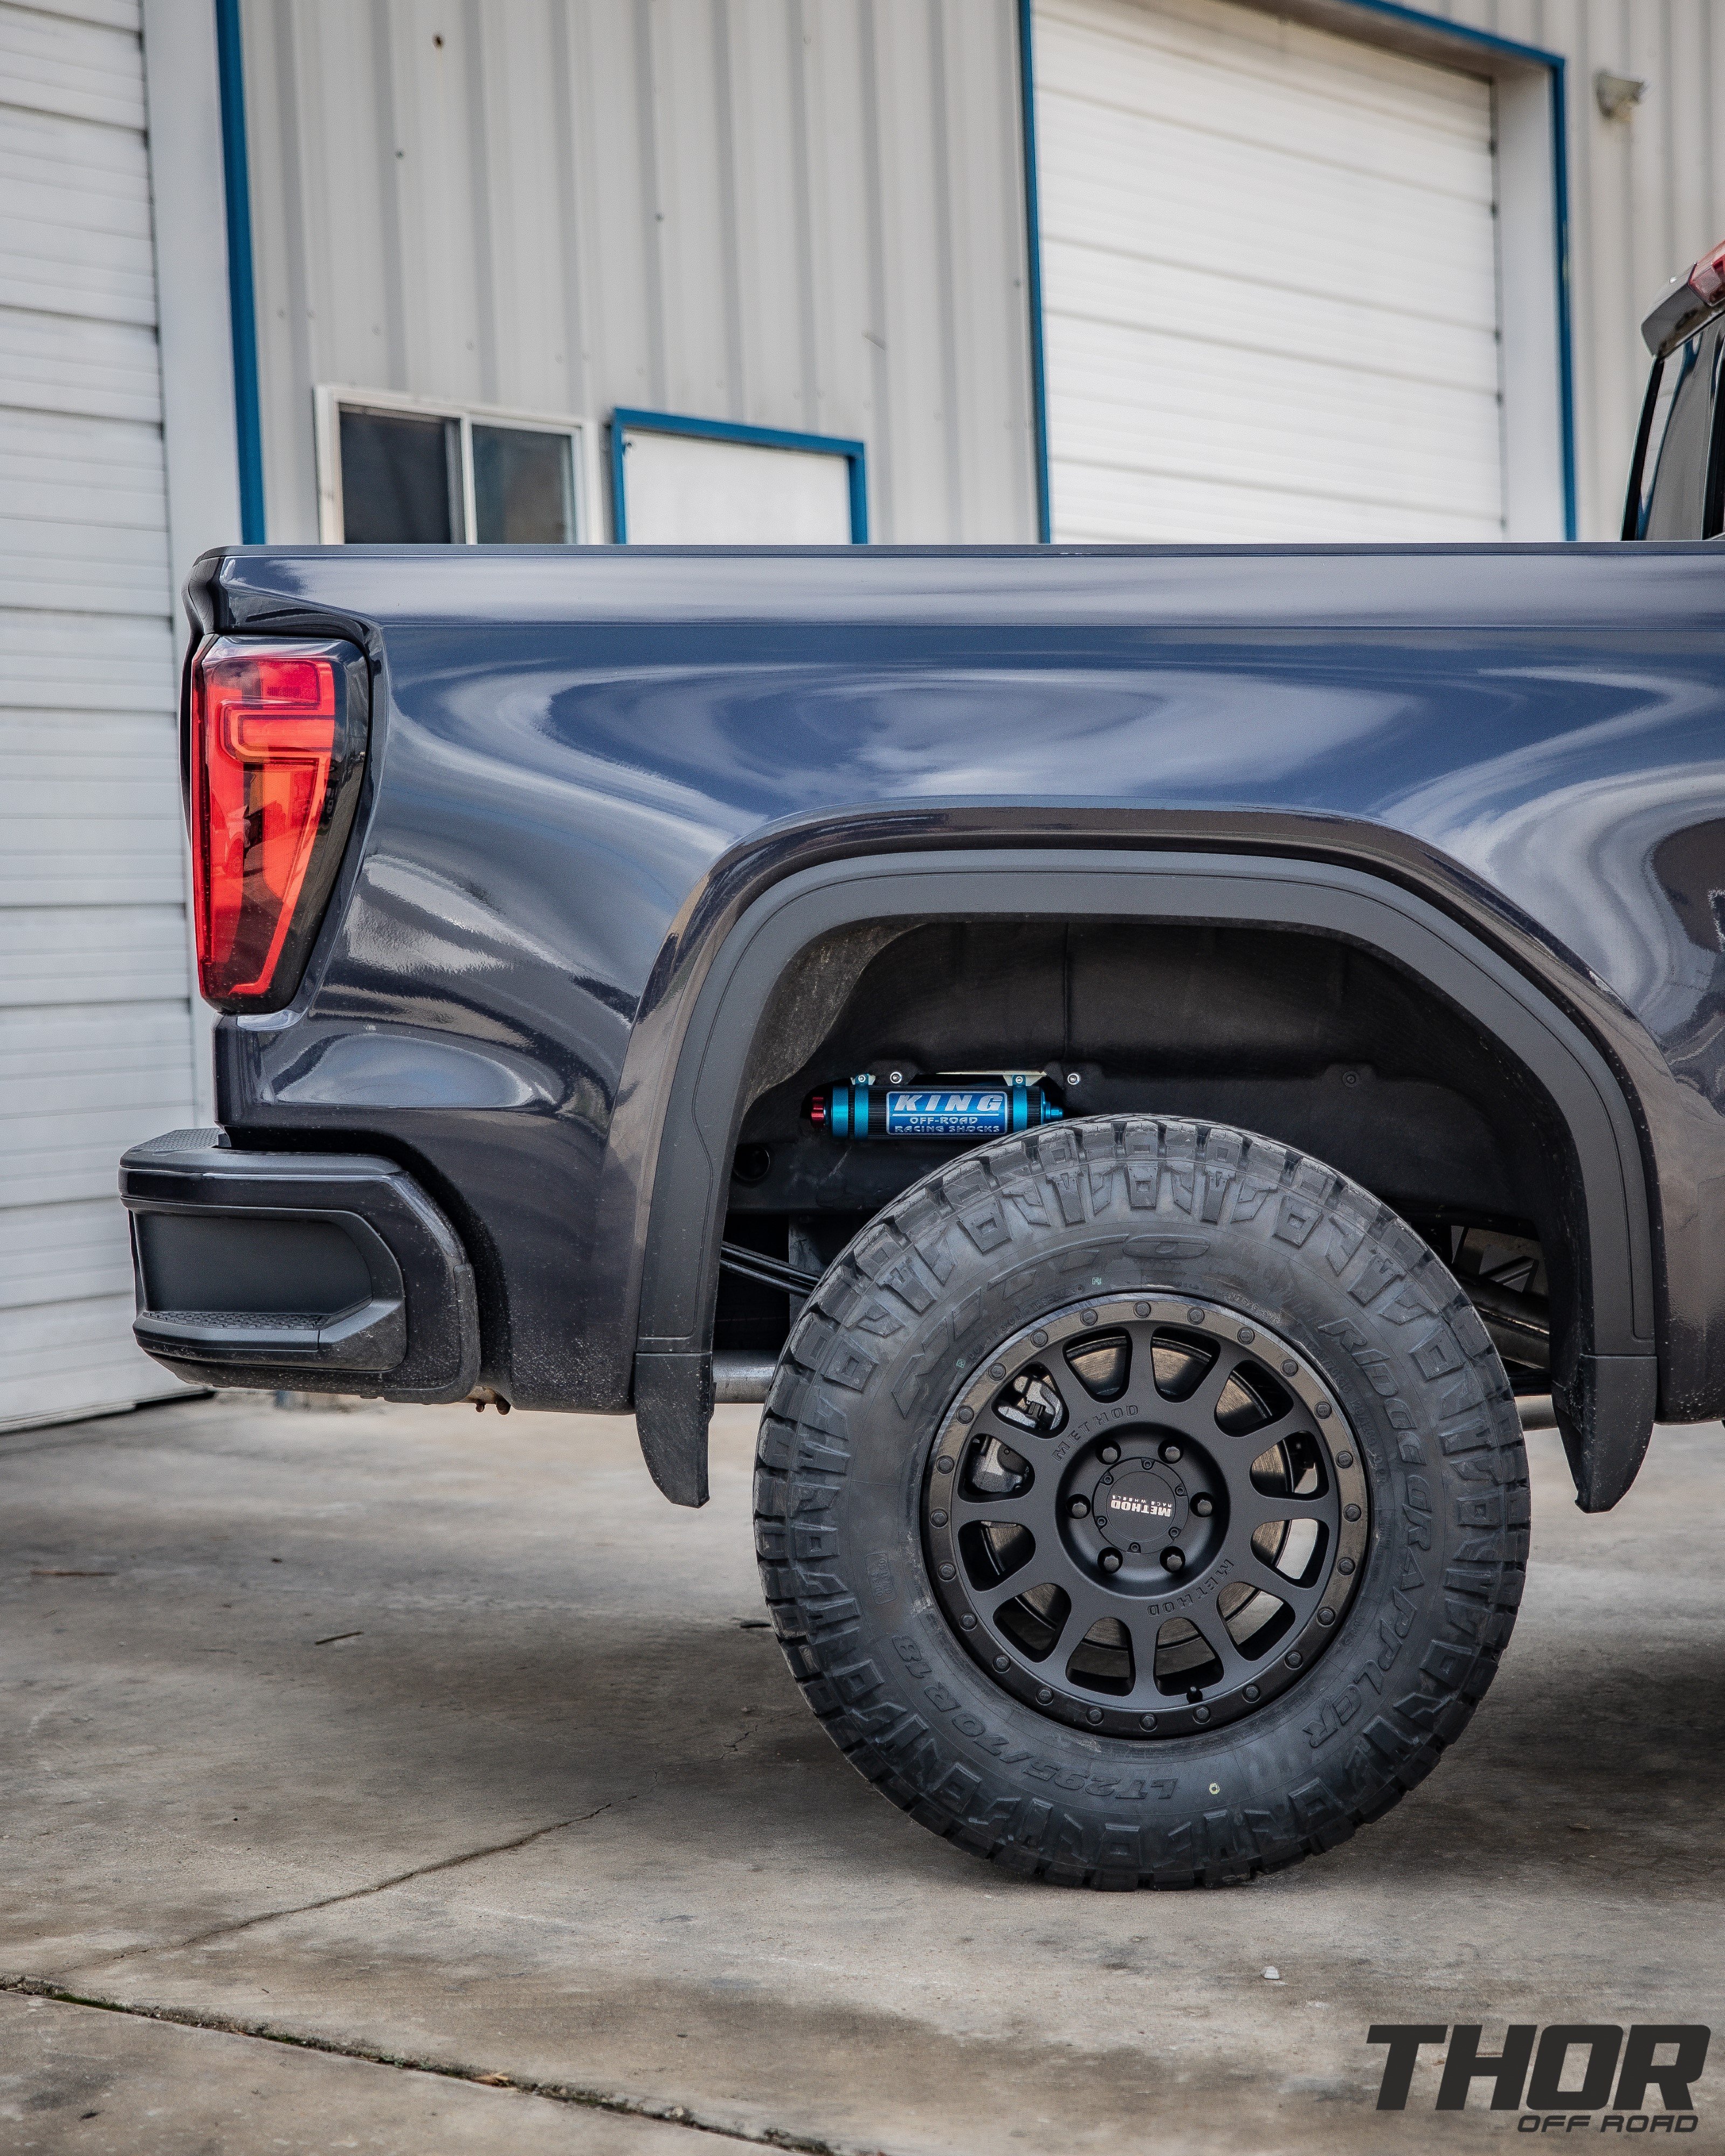 2024 GMC Sierra 1500 AT4 in Black with Cognito 1" Elite Leveling Kit with King 2.5 Shocks, Method 305NV Double Black 18x9" +18 Wheels, 295/70R18 Nitto Ridge Grappler Tires